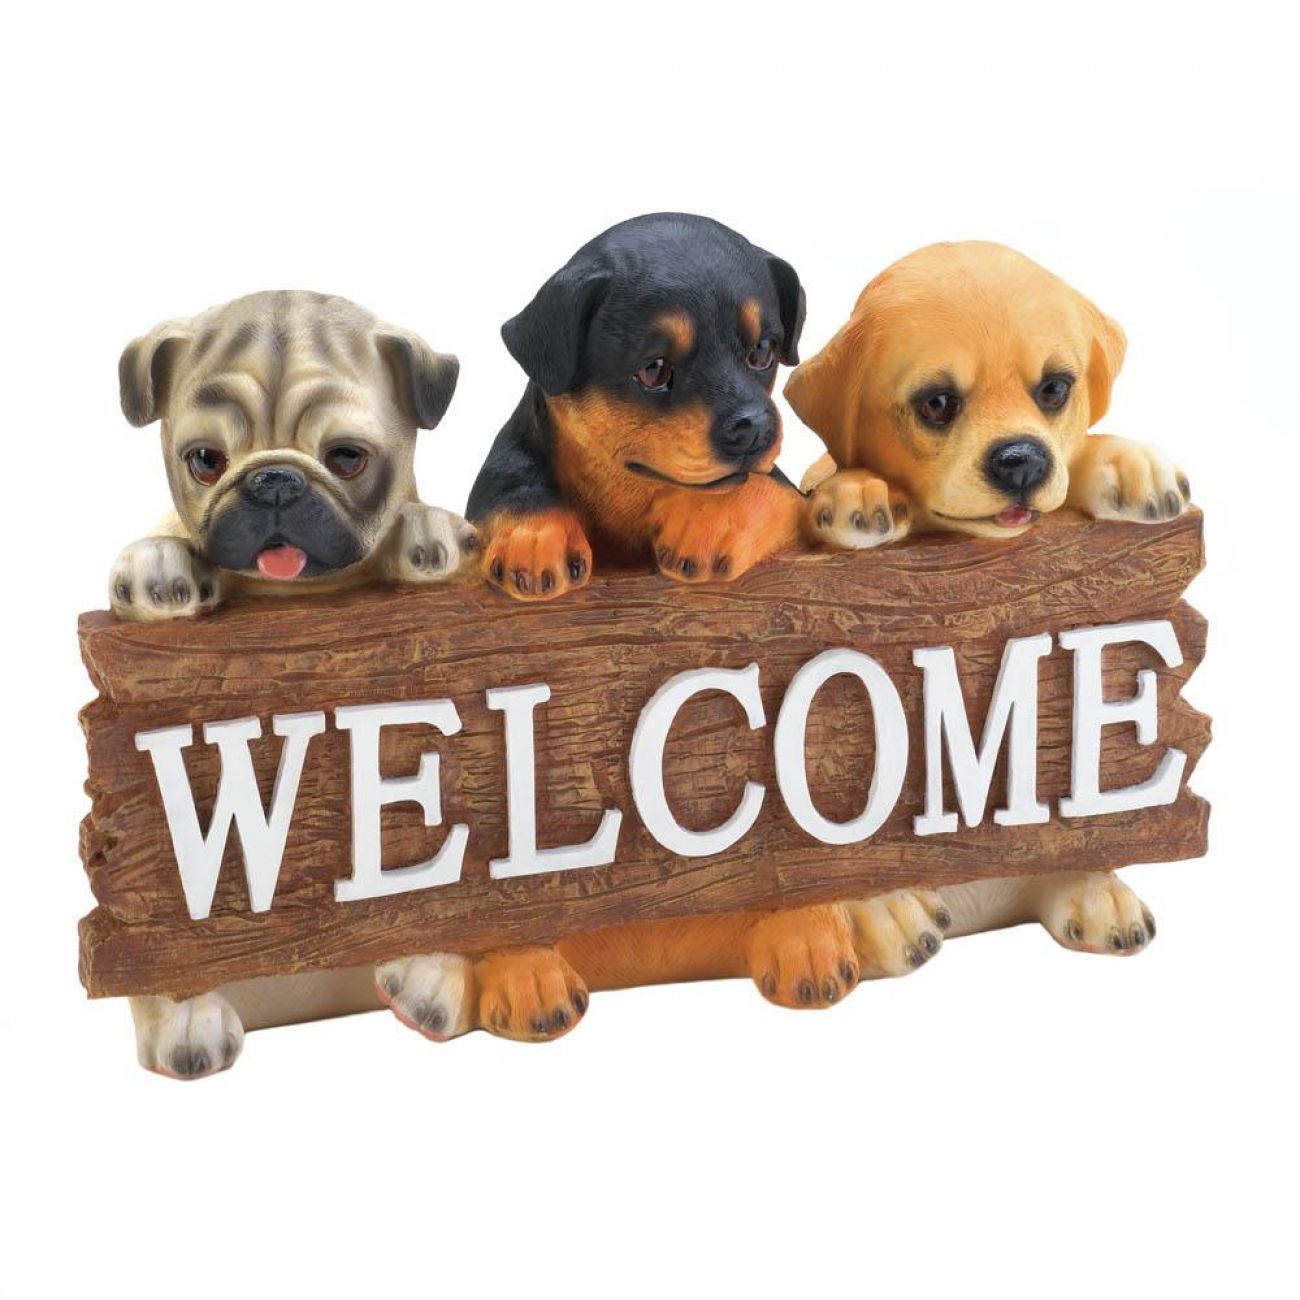 Puppy Dog Welcome Plaque